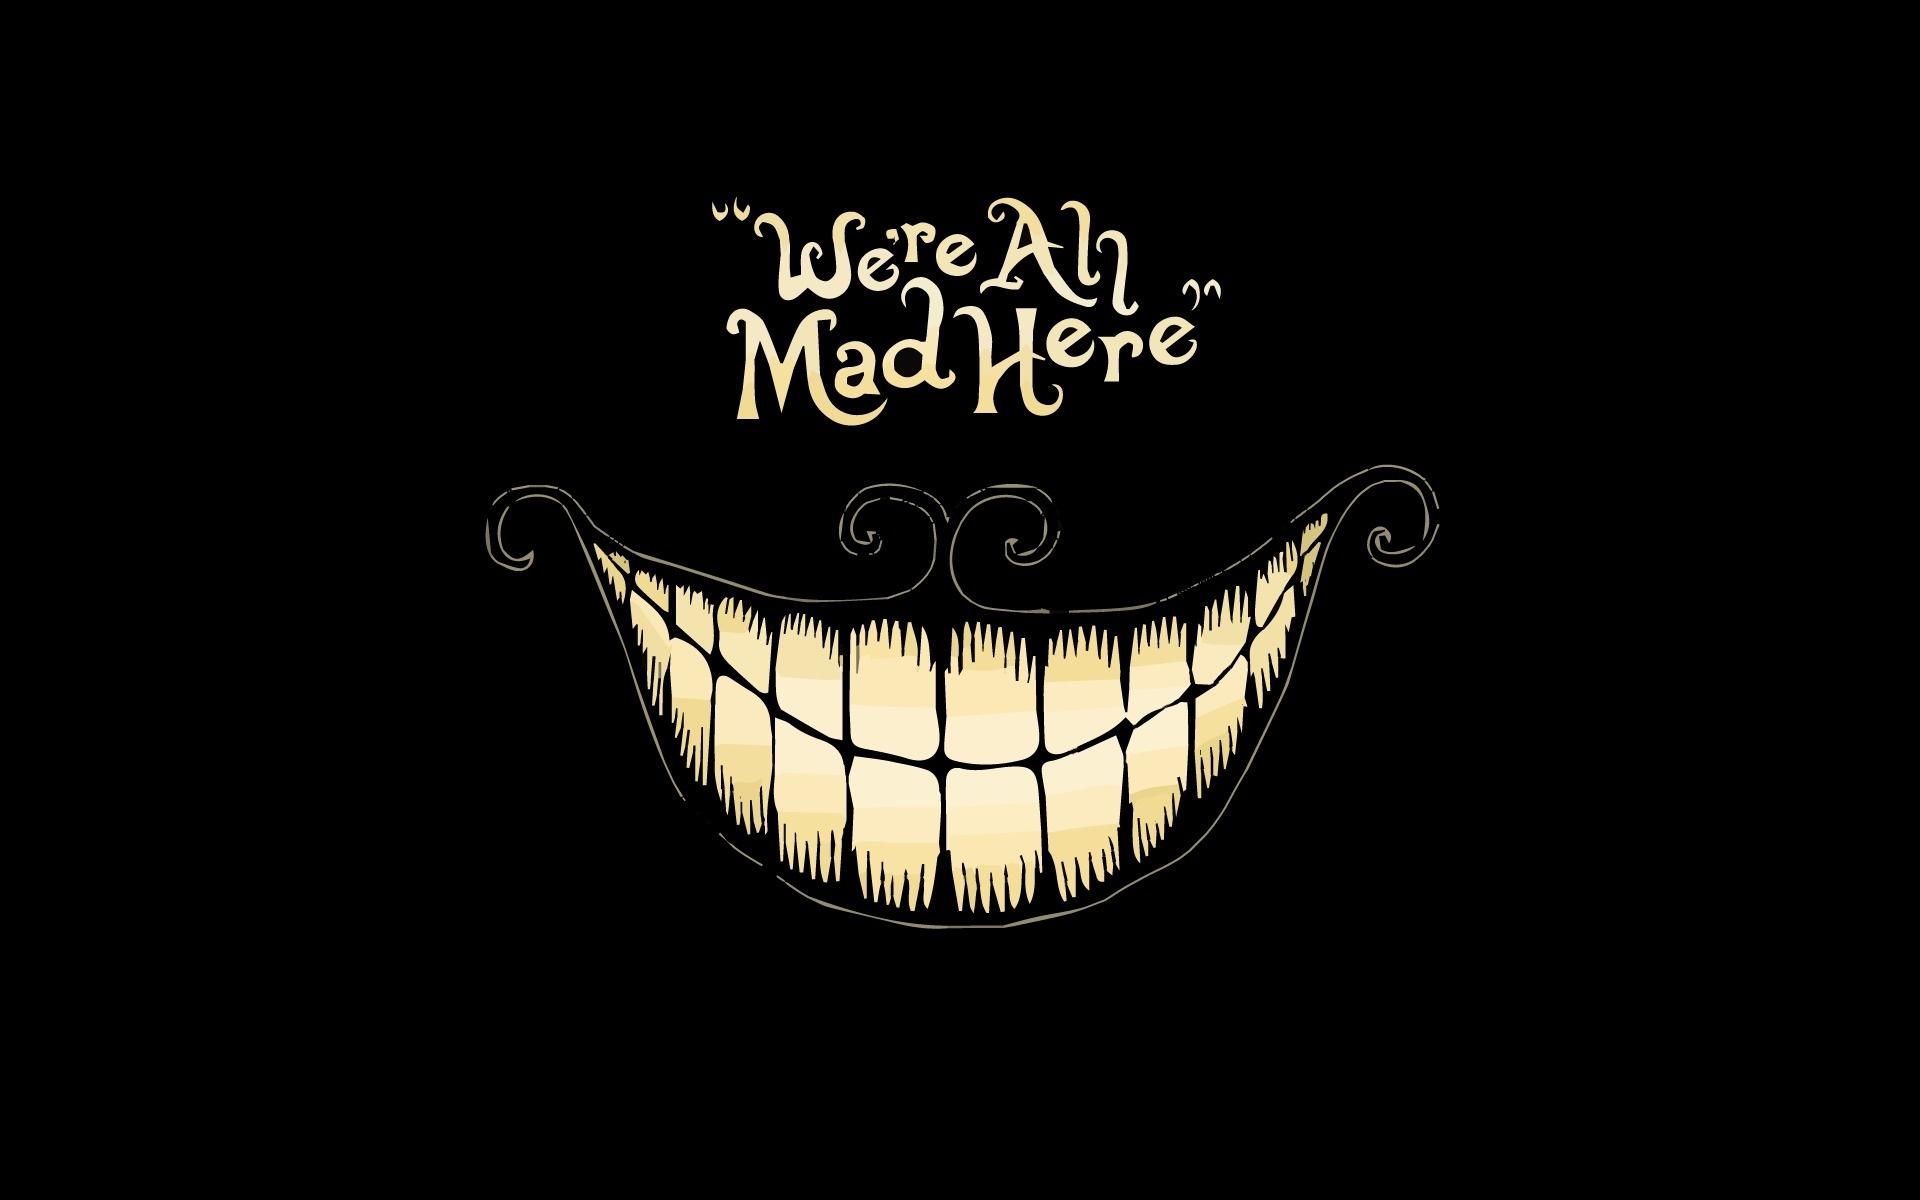 We're all mad here HD Wallpaper. Background Imagex1200